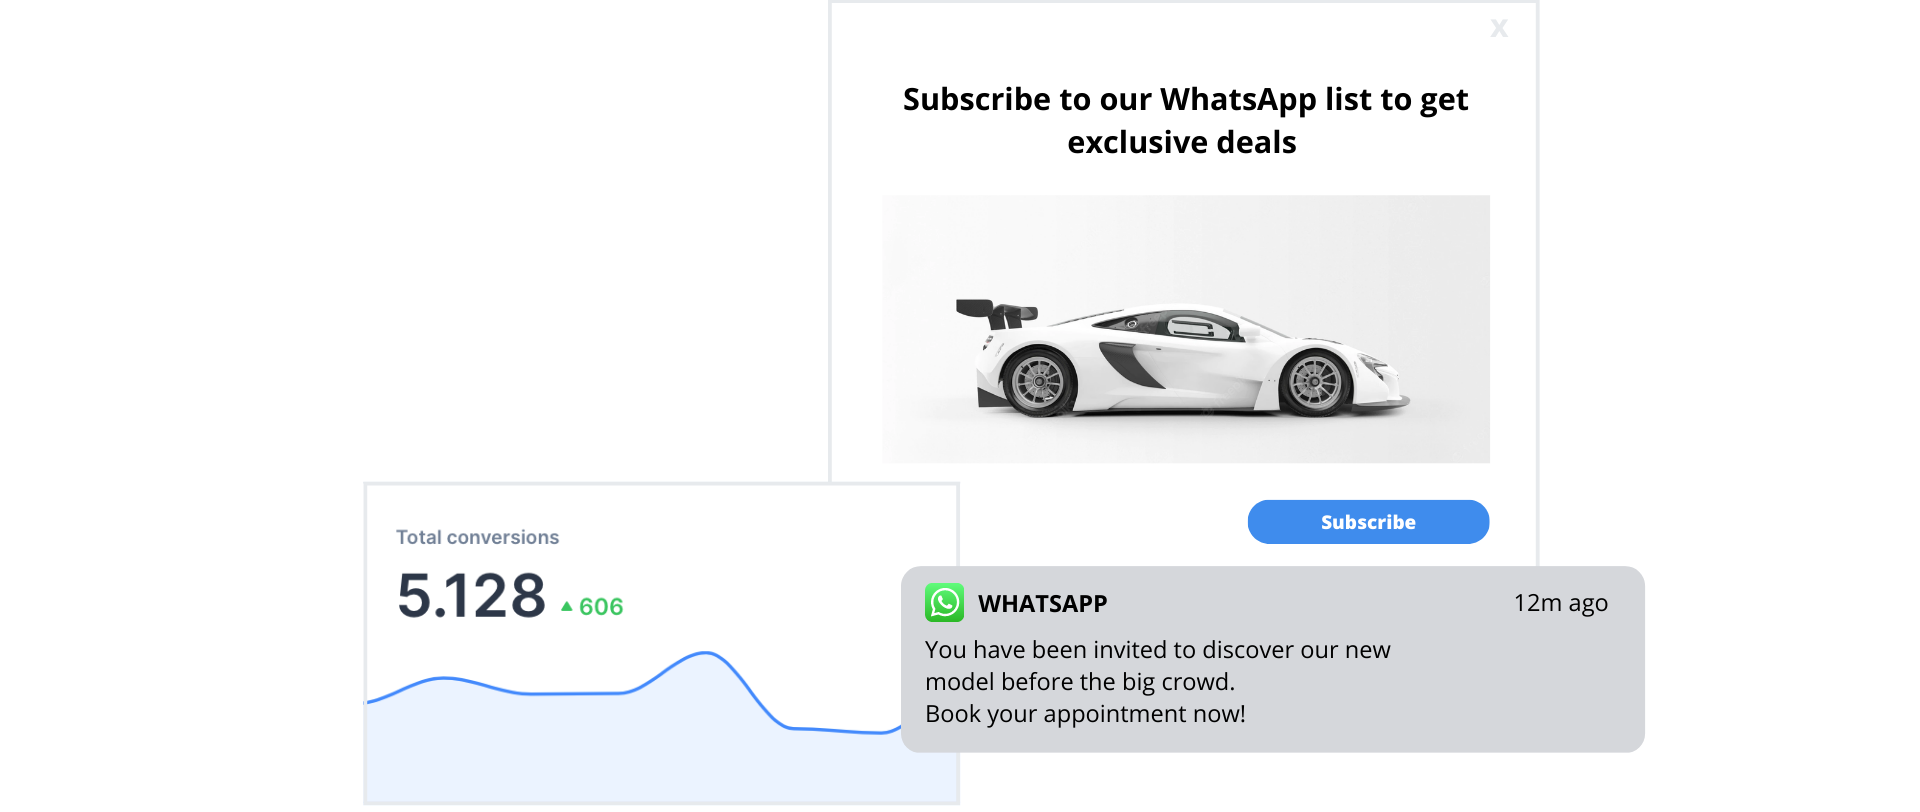 Pop-up and whatsapp message with metrics